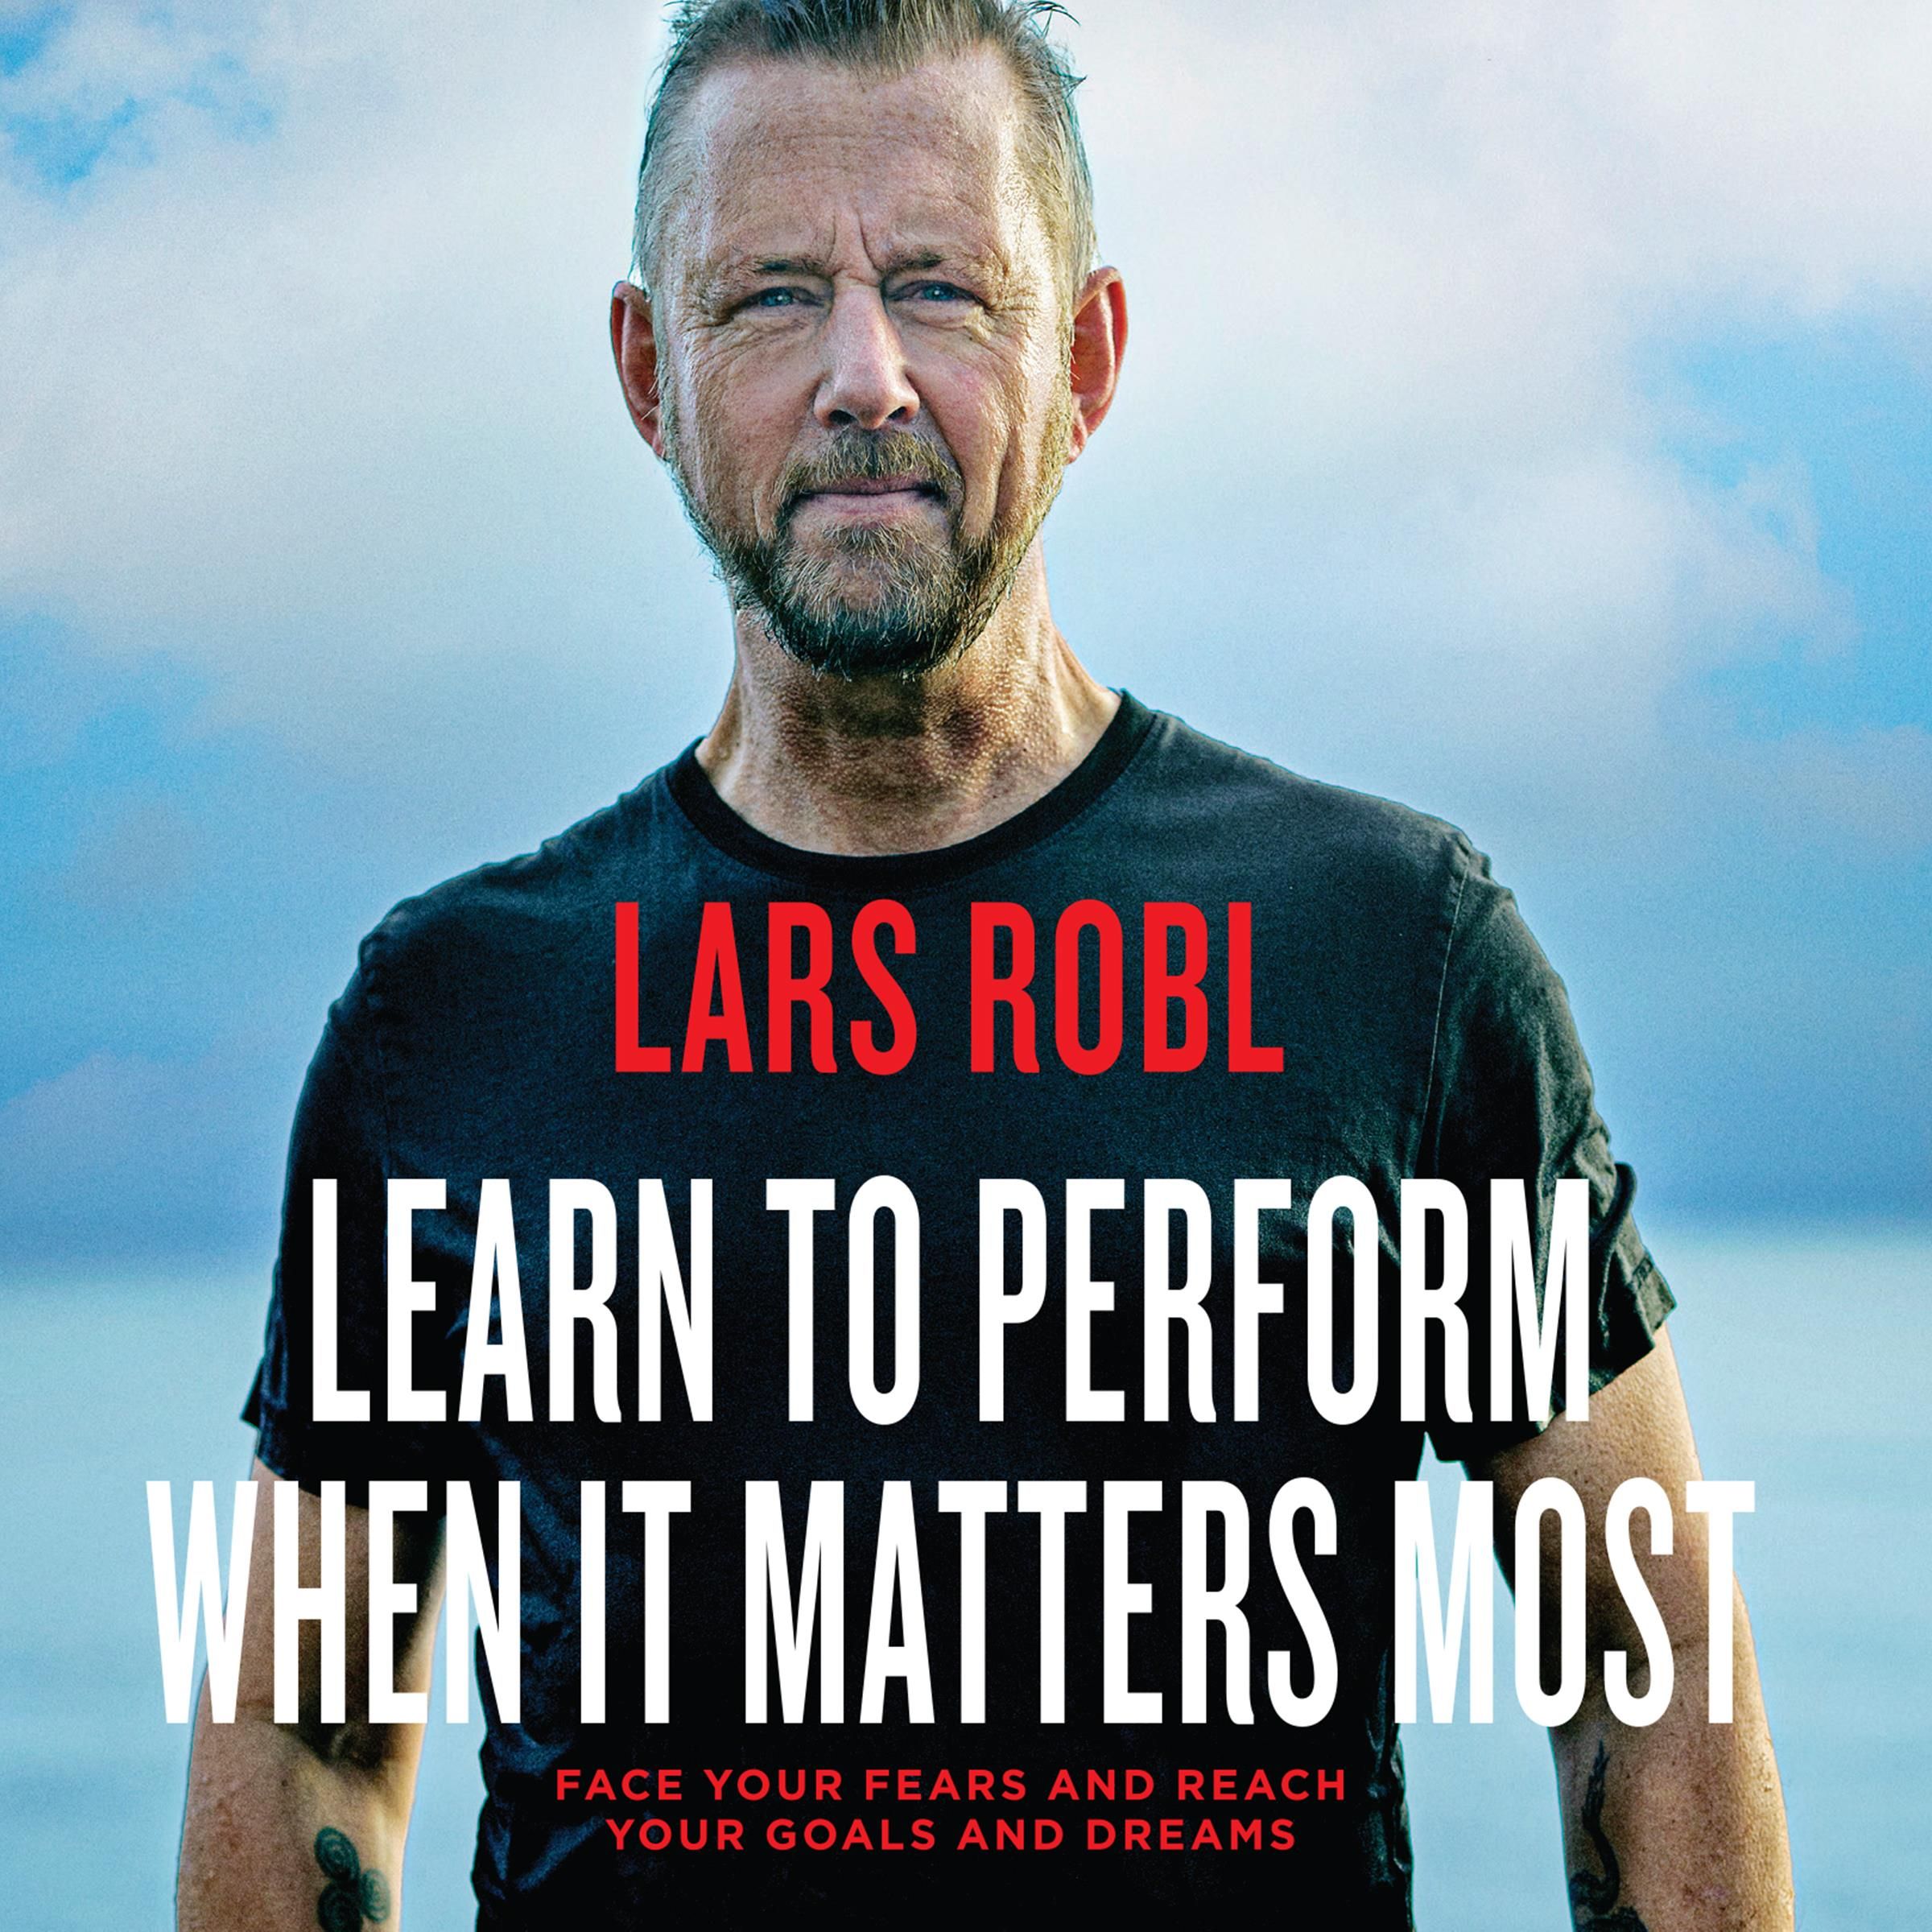 Learn to Perform When It Matters Most, audiobook by Lars Robl